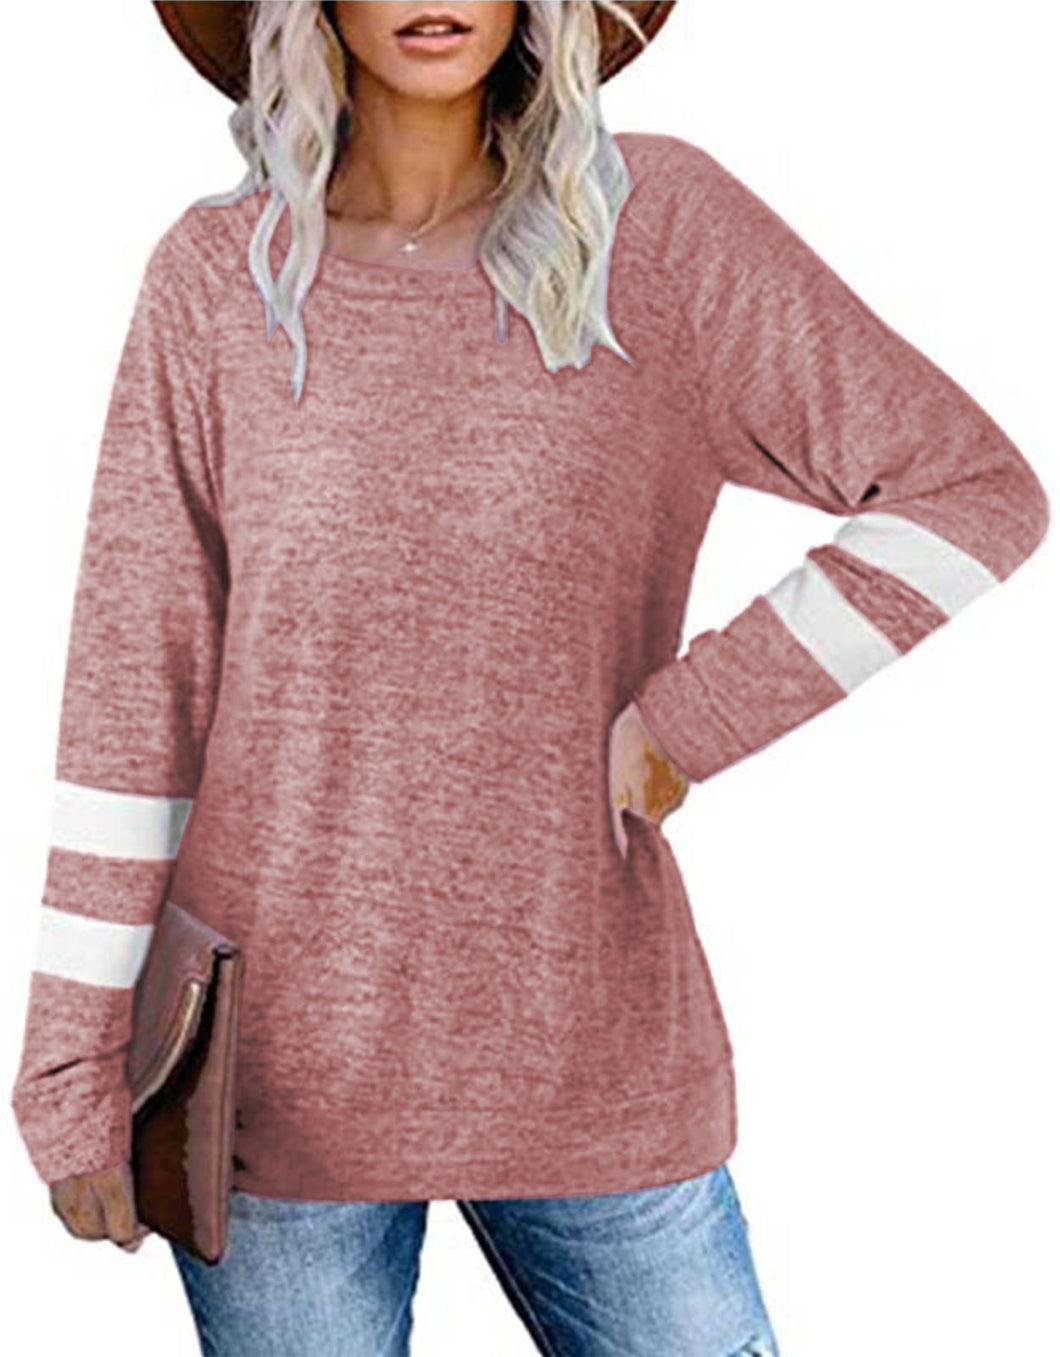 Basic Tee With Striped Sleeve T-shirt